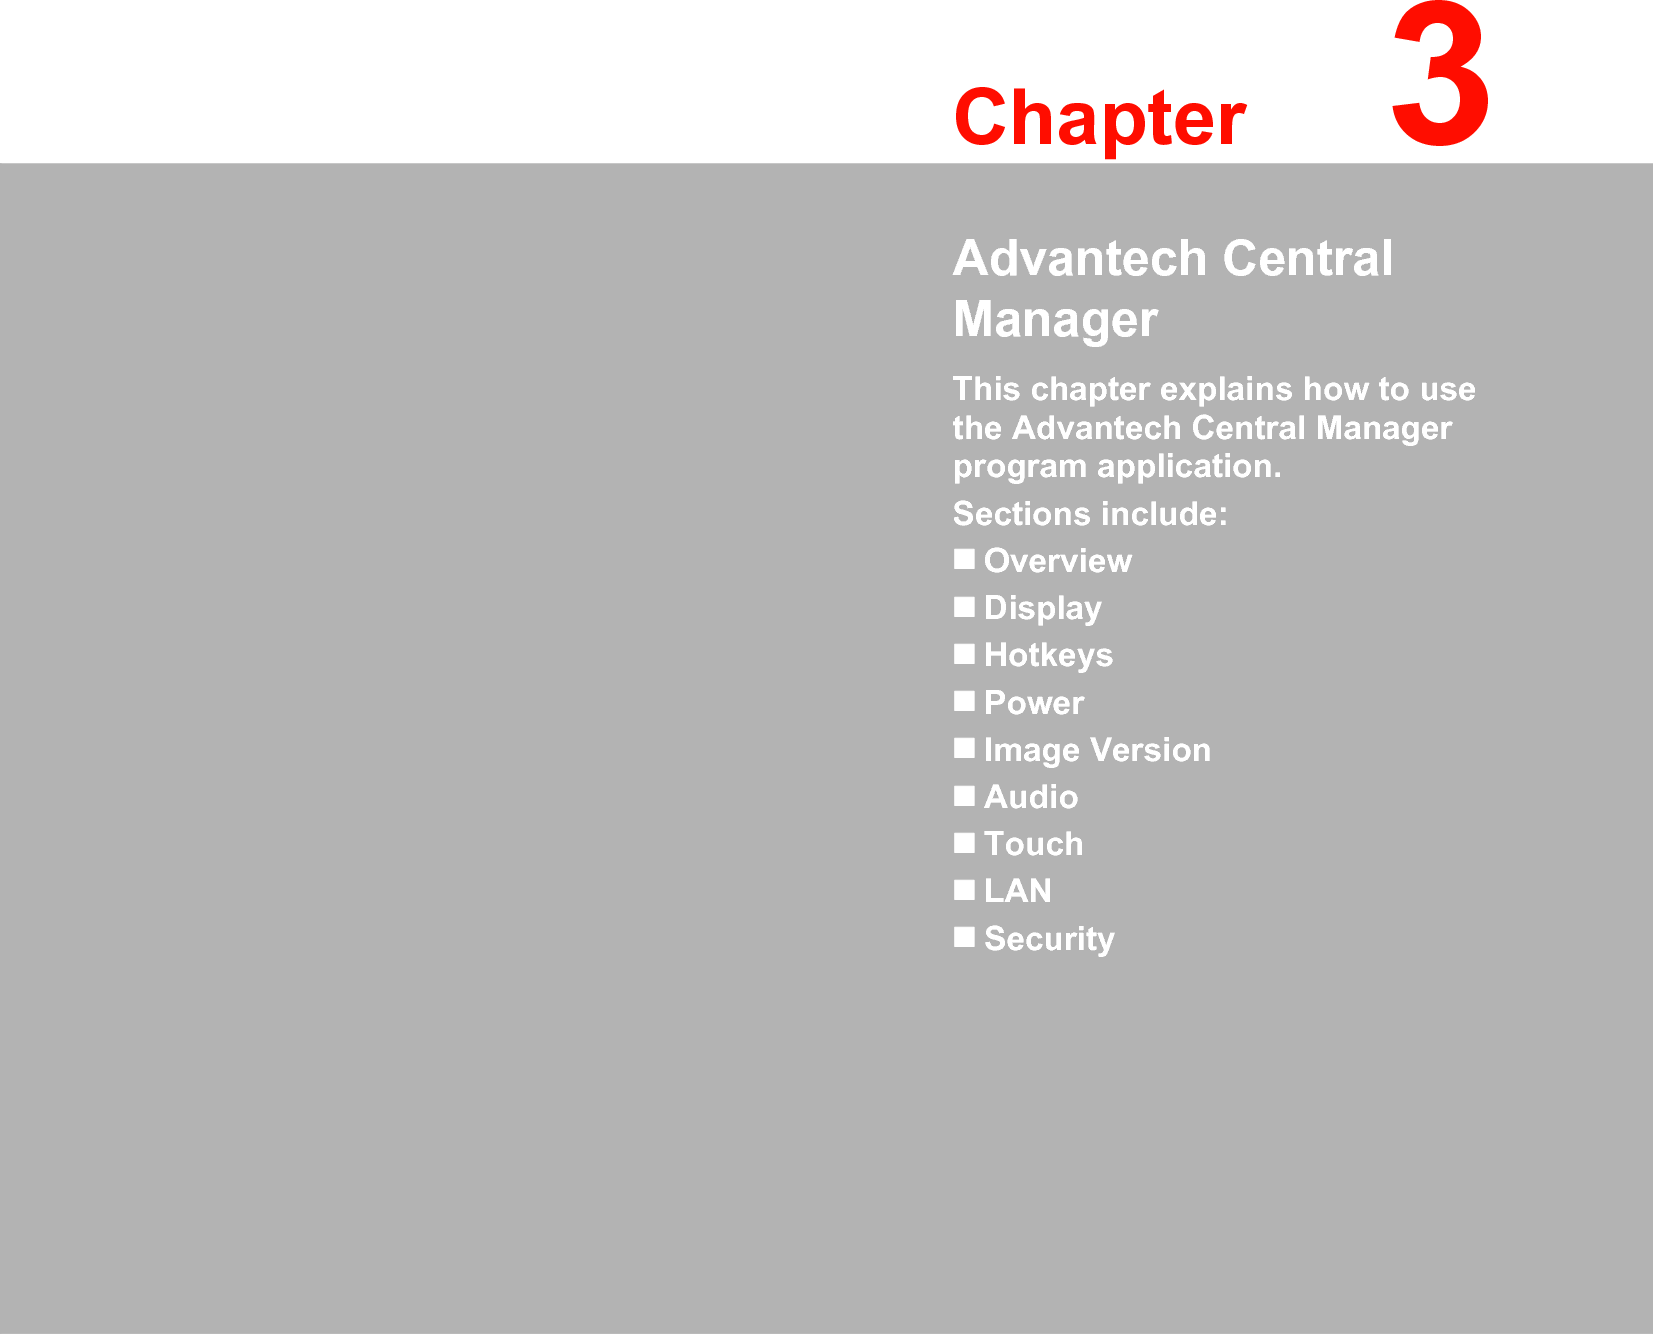 Chapter 33Advantech Central ManagerThis chapter explains how to use the Advantech Central Manager program application.Sections include:!Overview!Display!Hotkeys!Power!Image Version!Audio !Touch!LAN!Security